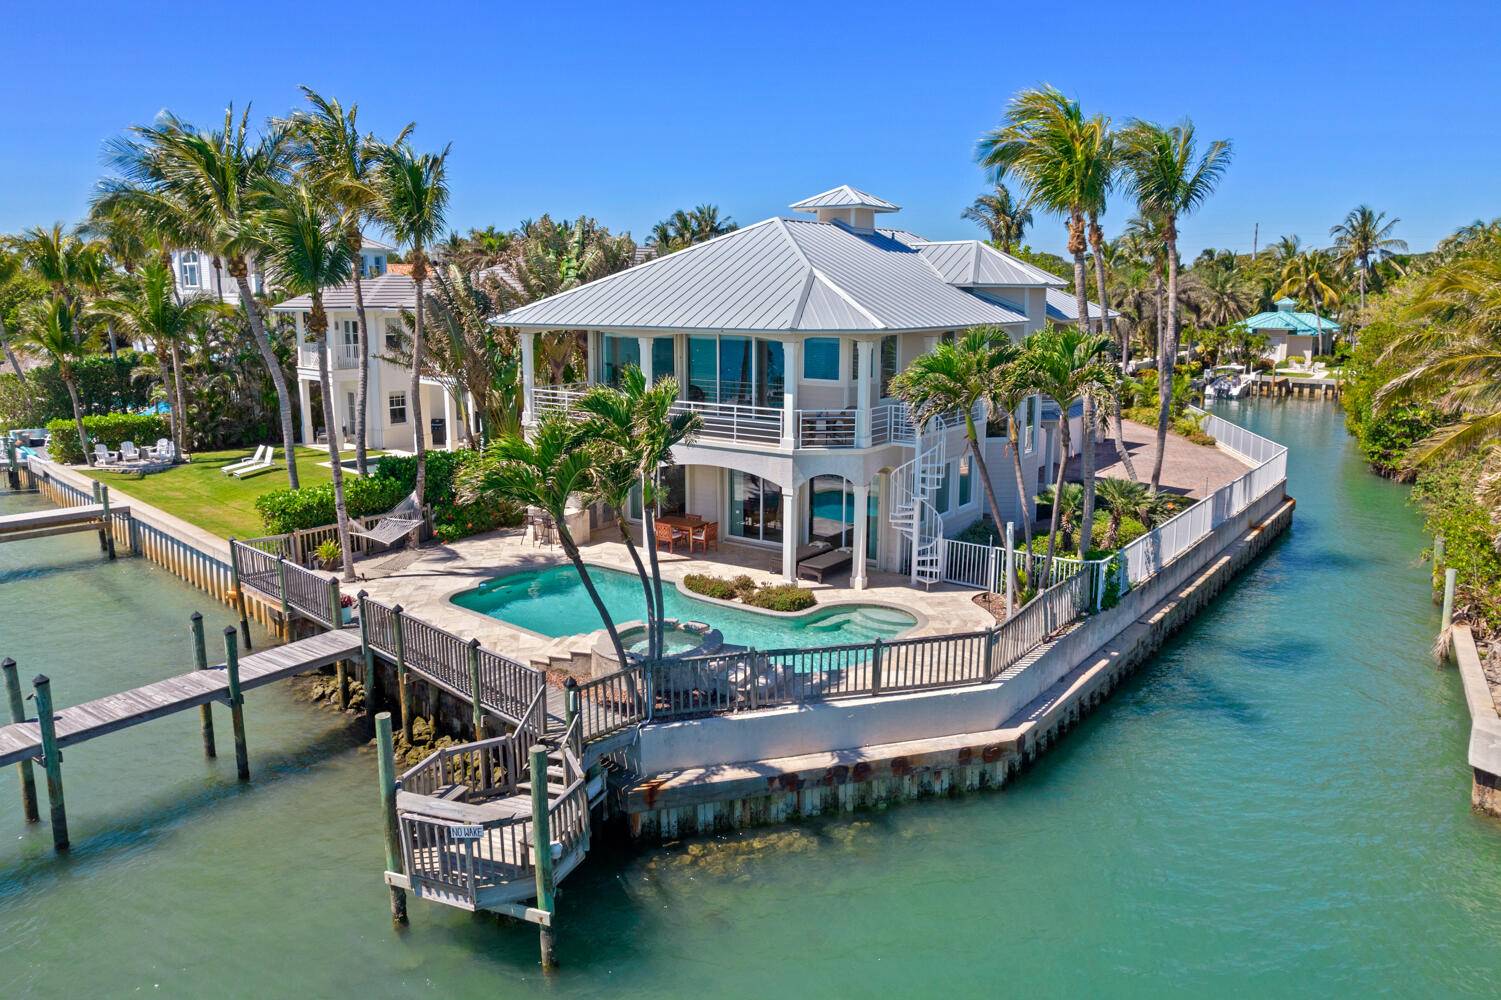 This extraordinary Key West style haven, zoned for commercial use, is a boater's dream property.